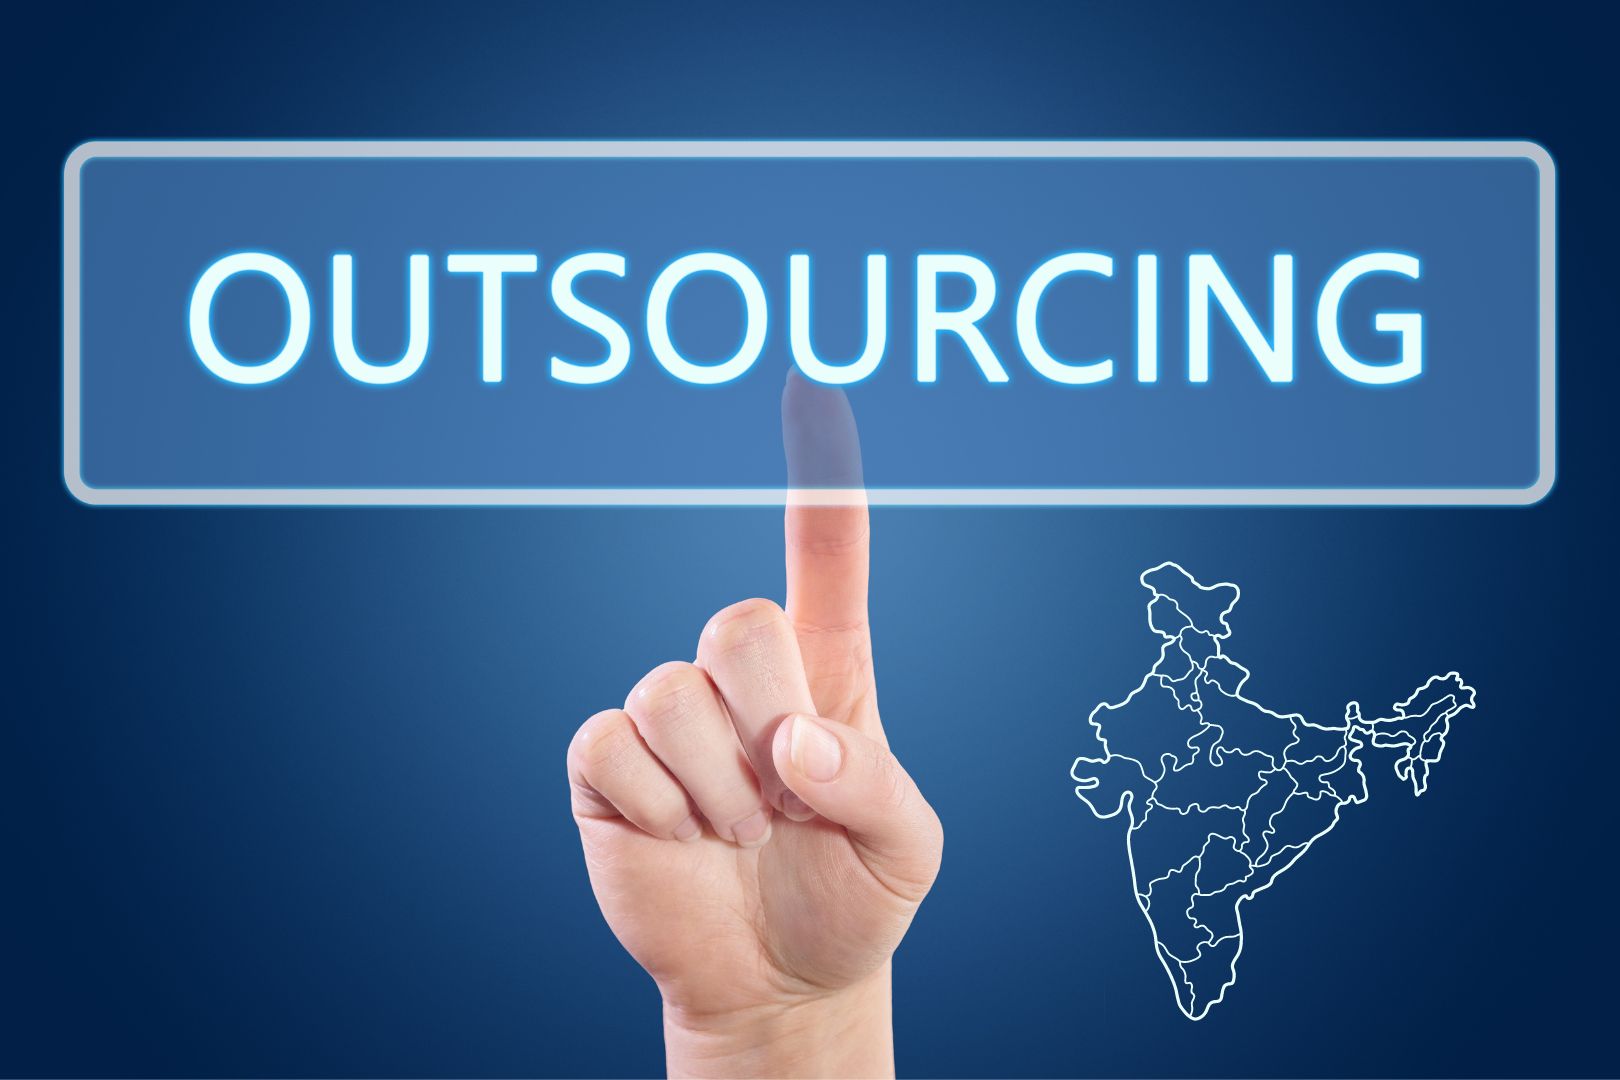 Why is India leading in outsourcing and offshoring industry?